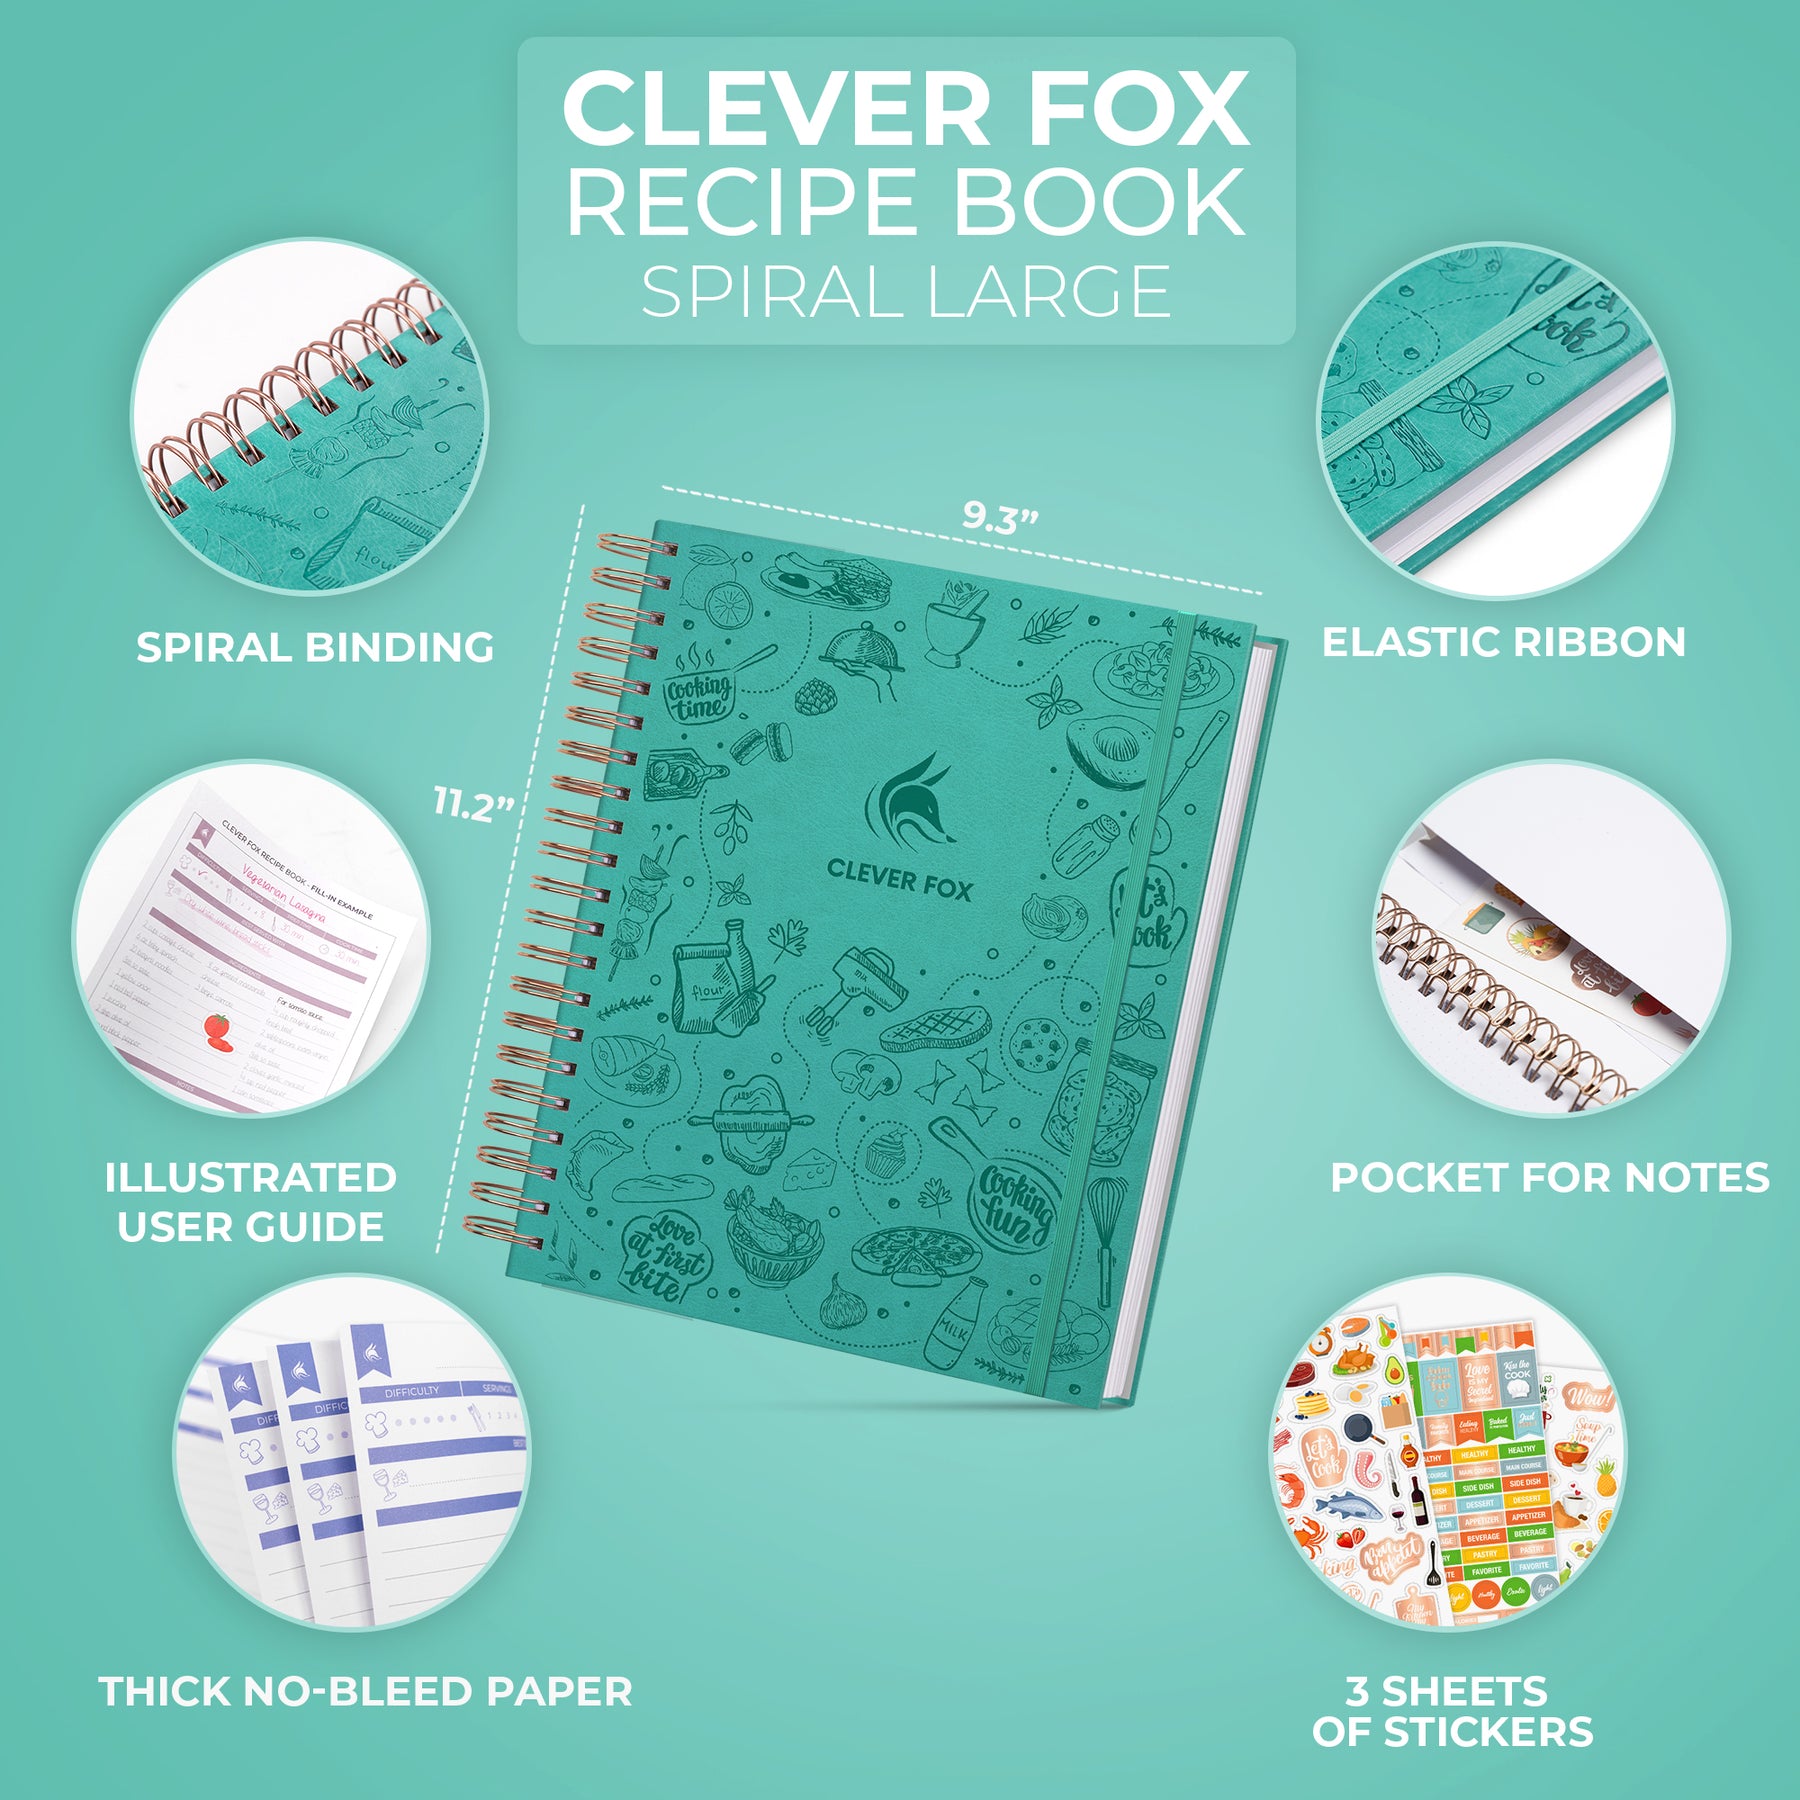 Clever Fox Recipe Book - Make Your Own 